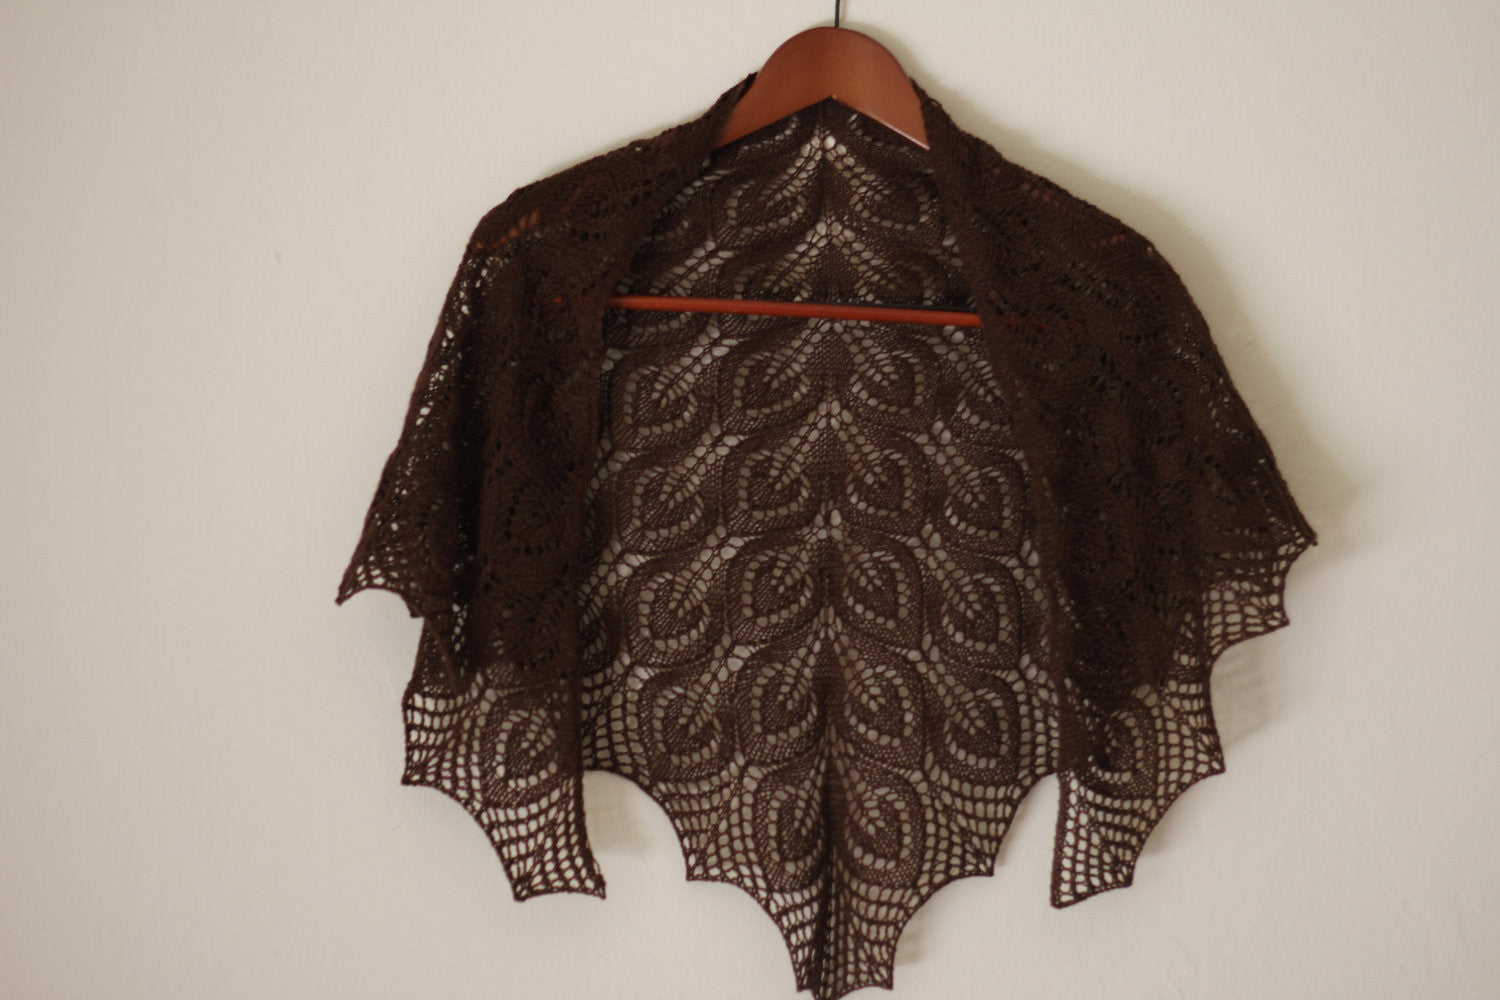 Knitted lace shawl in brown color